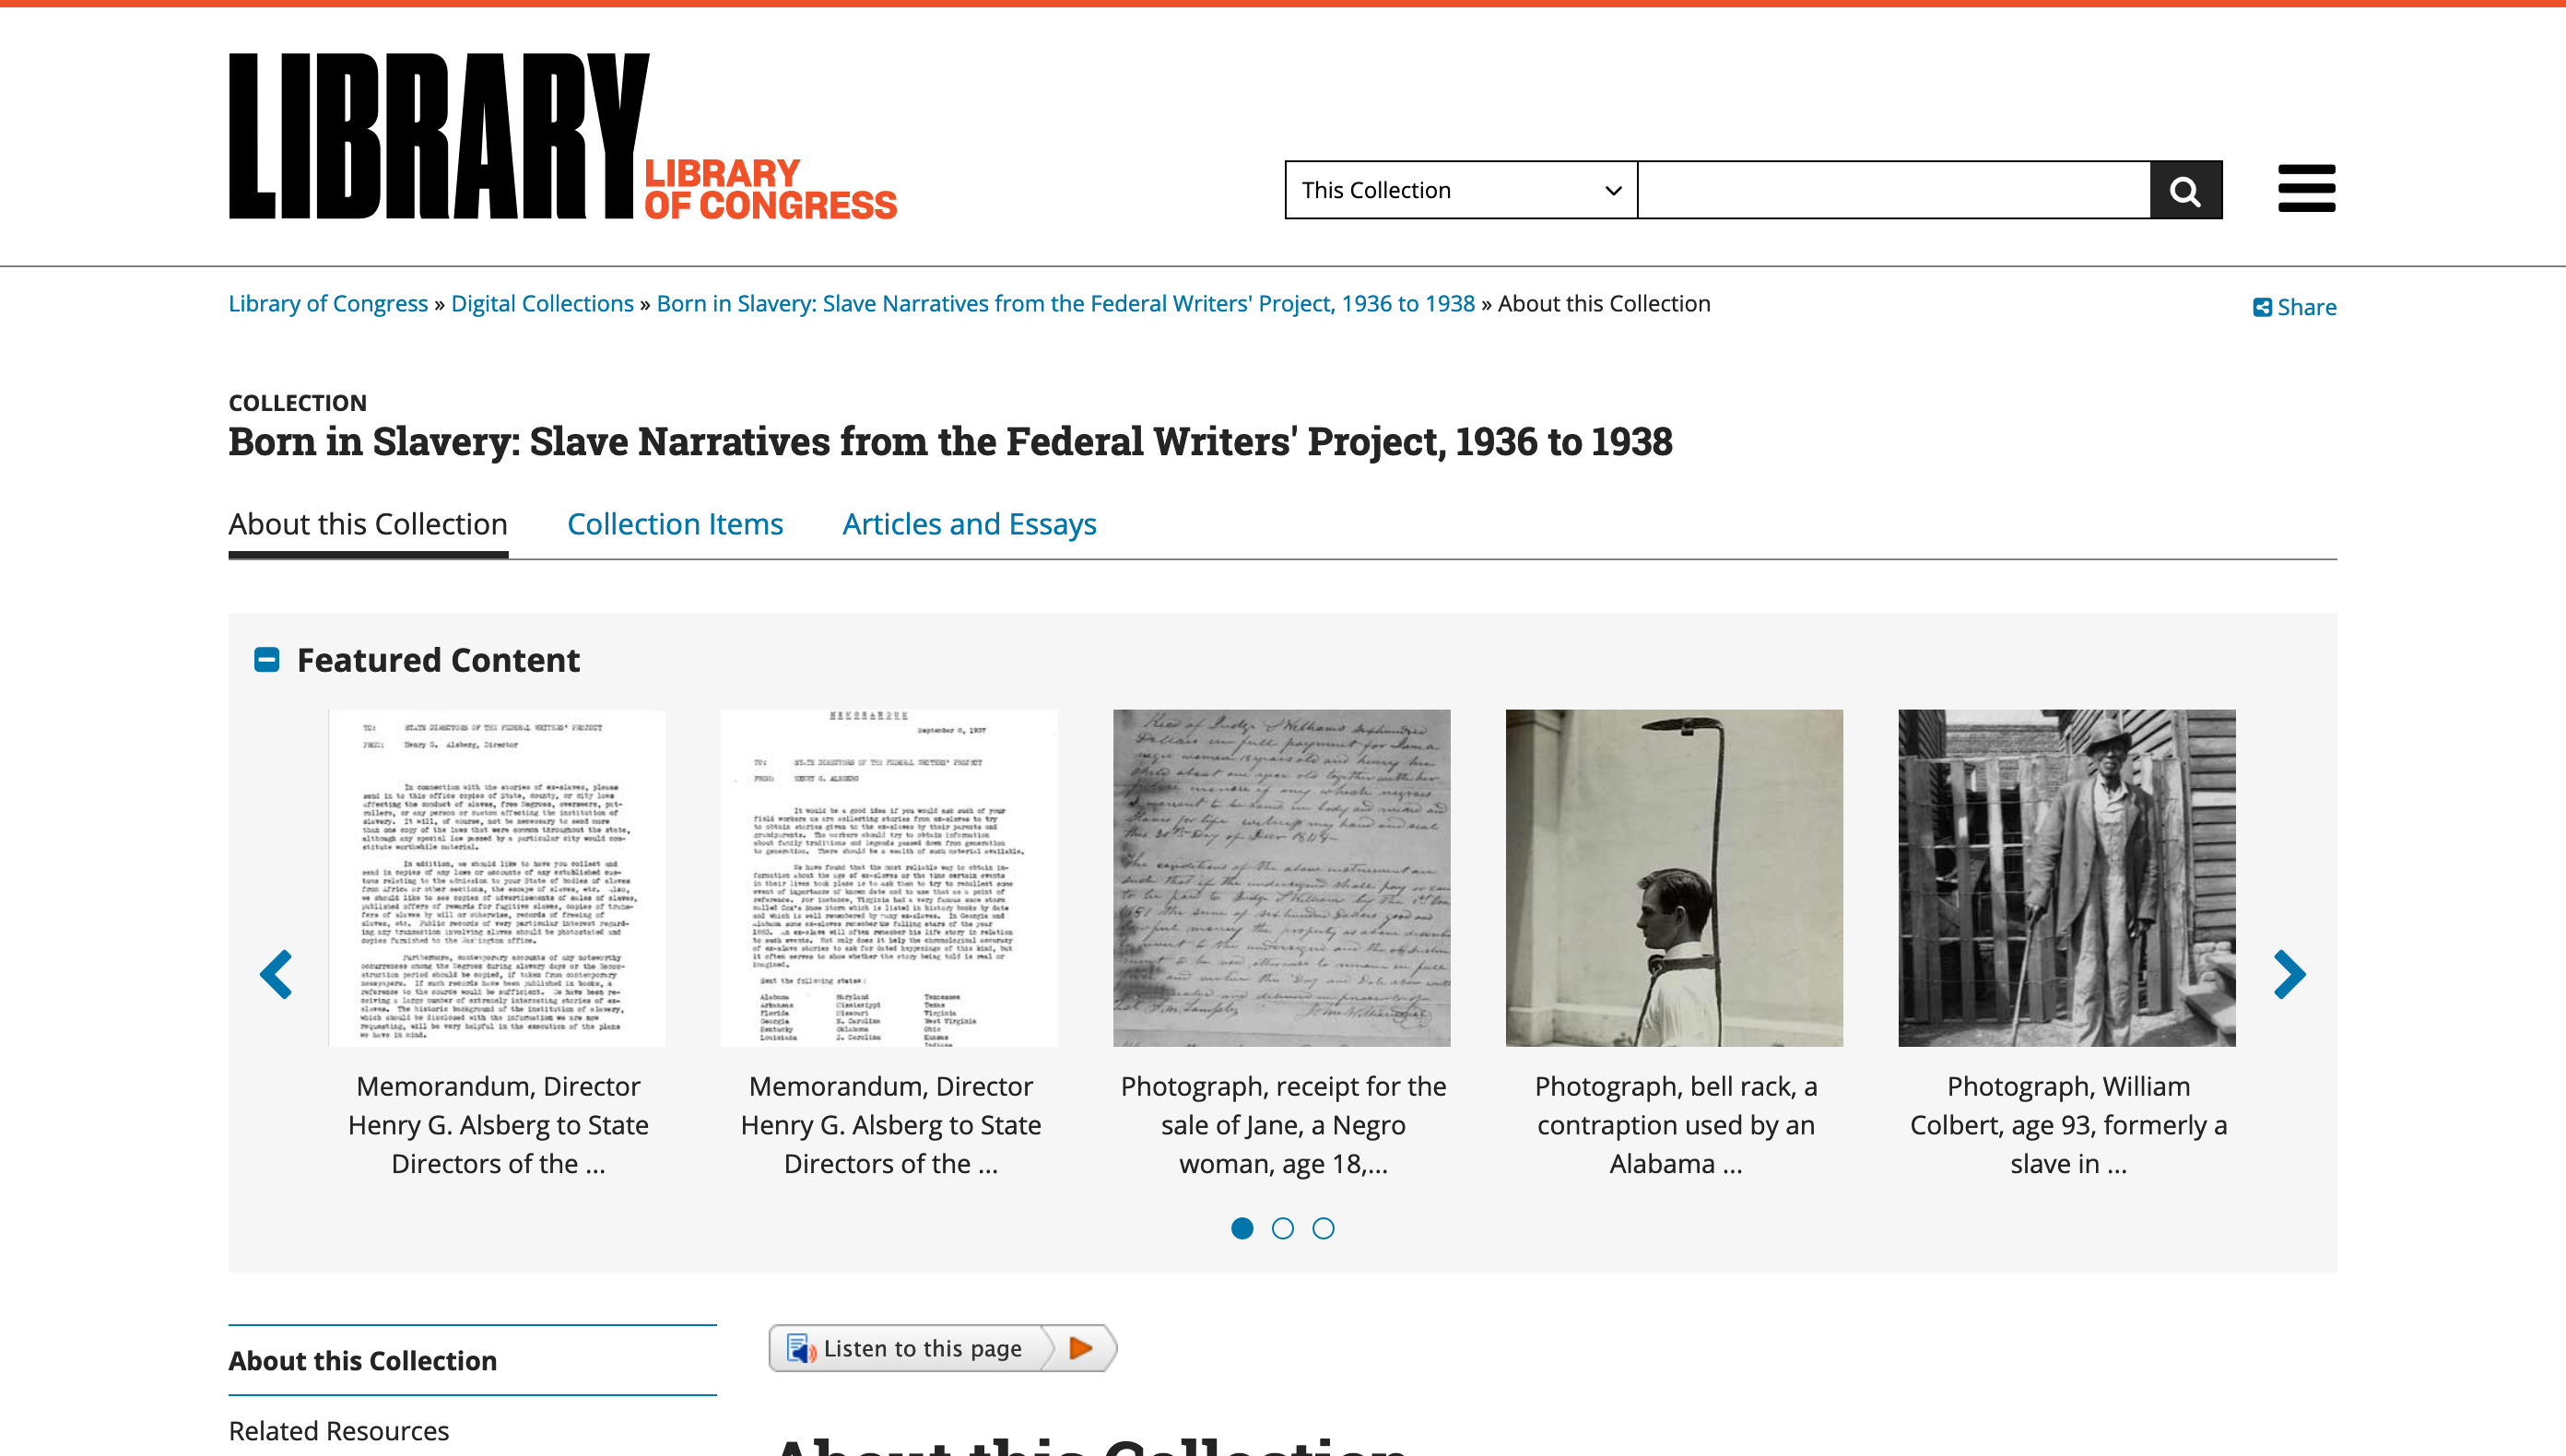 Born in Slavery: Slave Narratives from the Federal Writers' Project:1936 to 1938